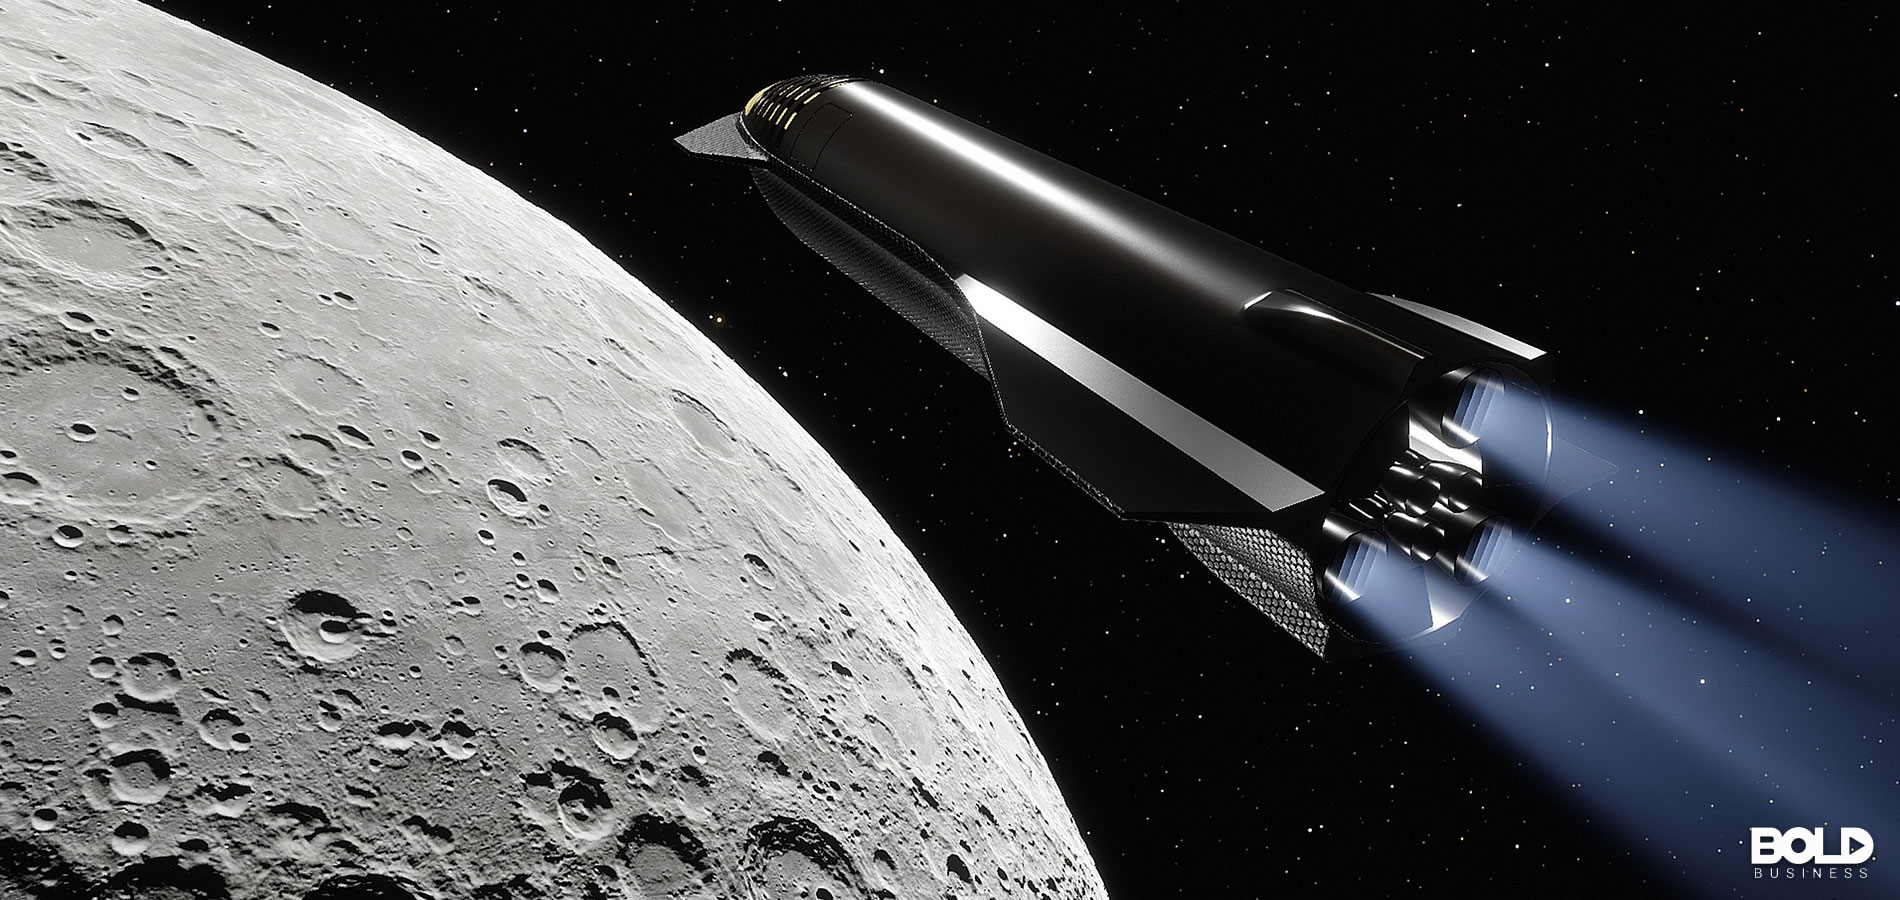 Will You Ride the SpaceX Shuttle to the Moon? – NASA Hopes So